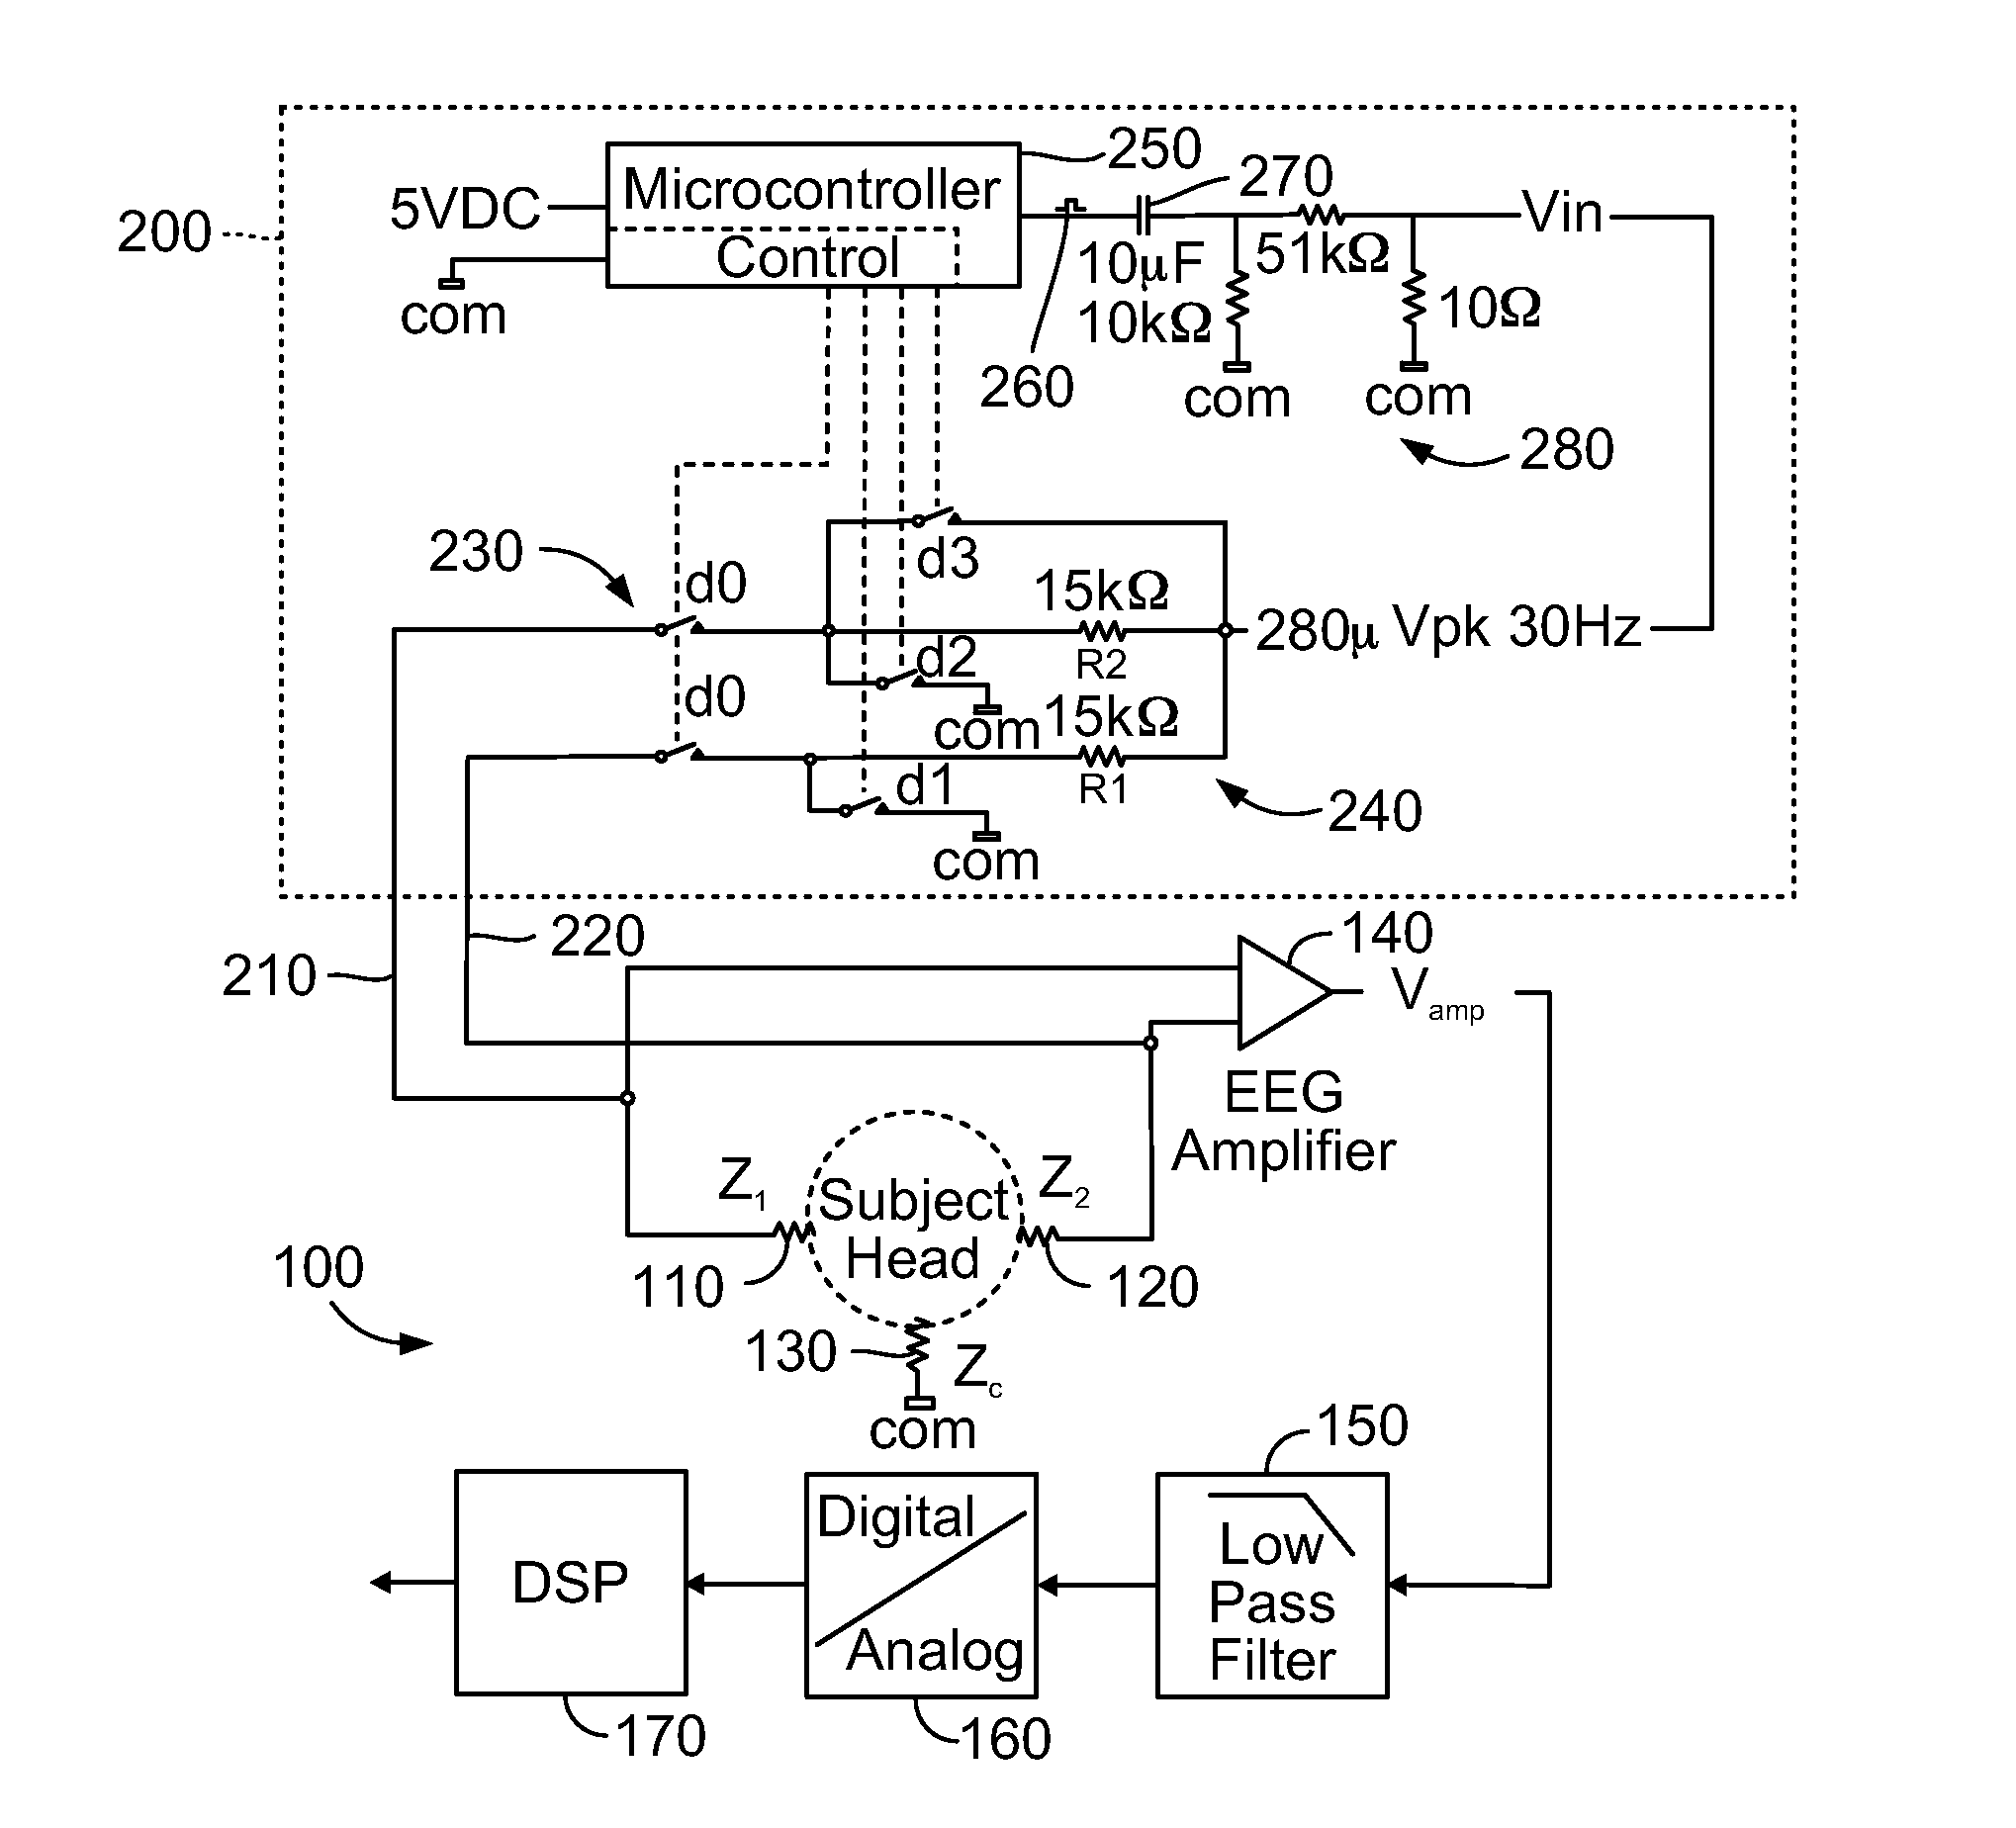 Apparatus and method for high-speed determination of bioelectric electrode impedances